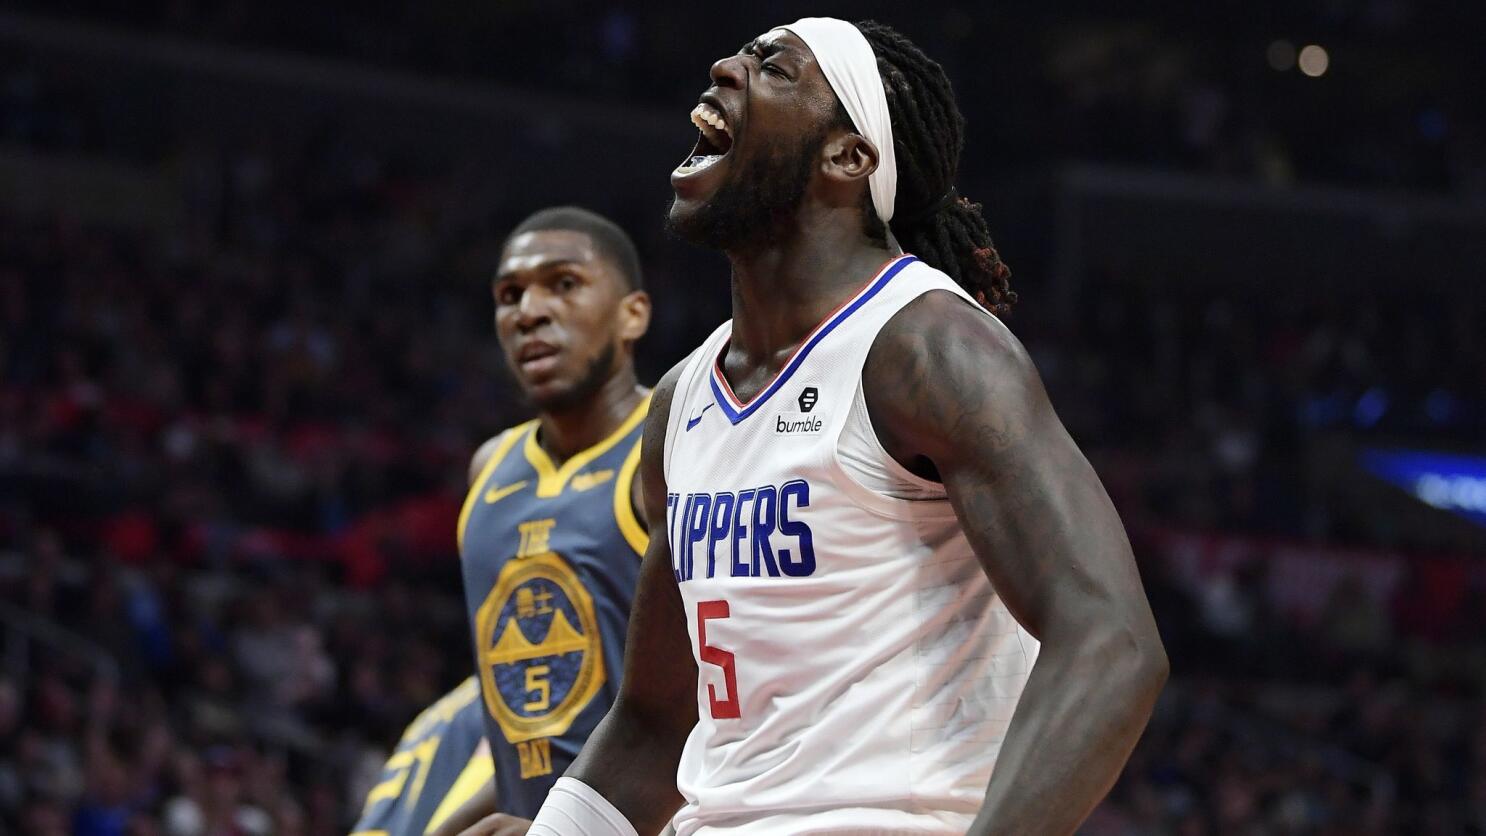 Los Angeles Clippers: Montrezl Harrell was a better option at center